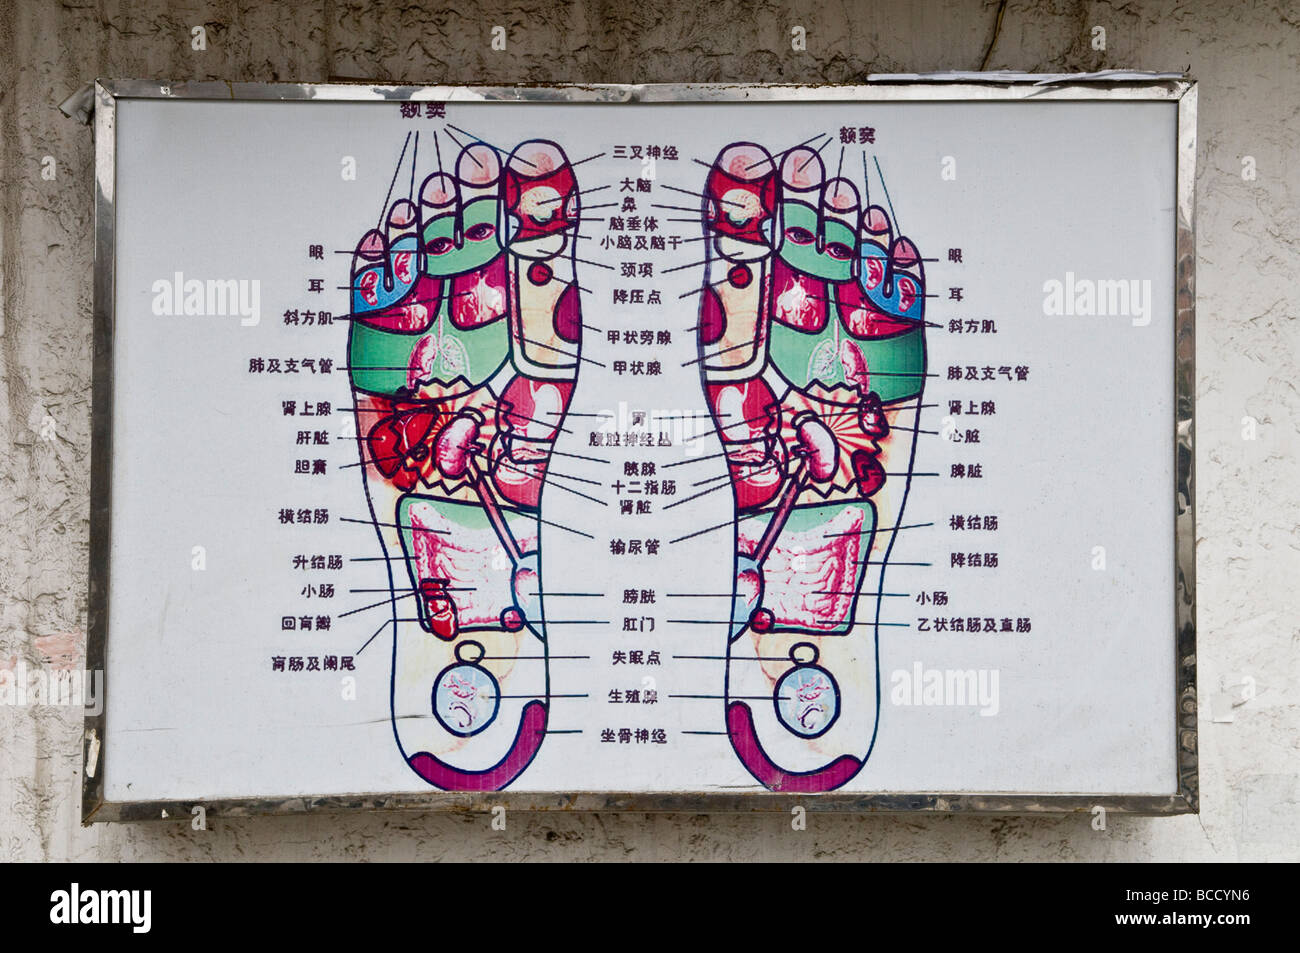 Foot massage sign in China Stock Photo